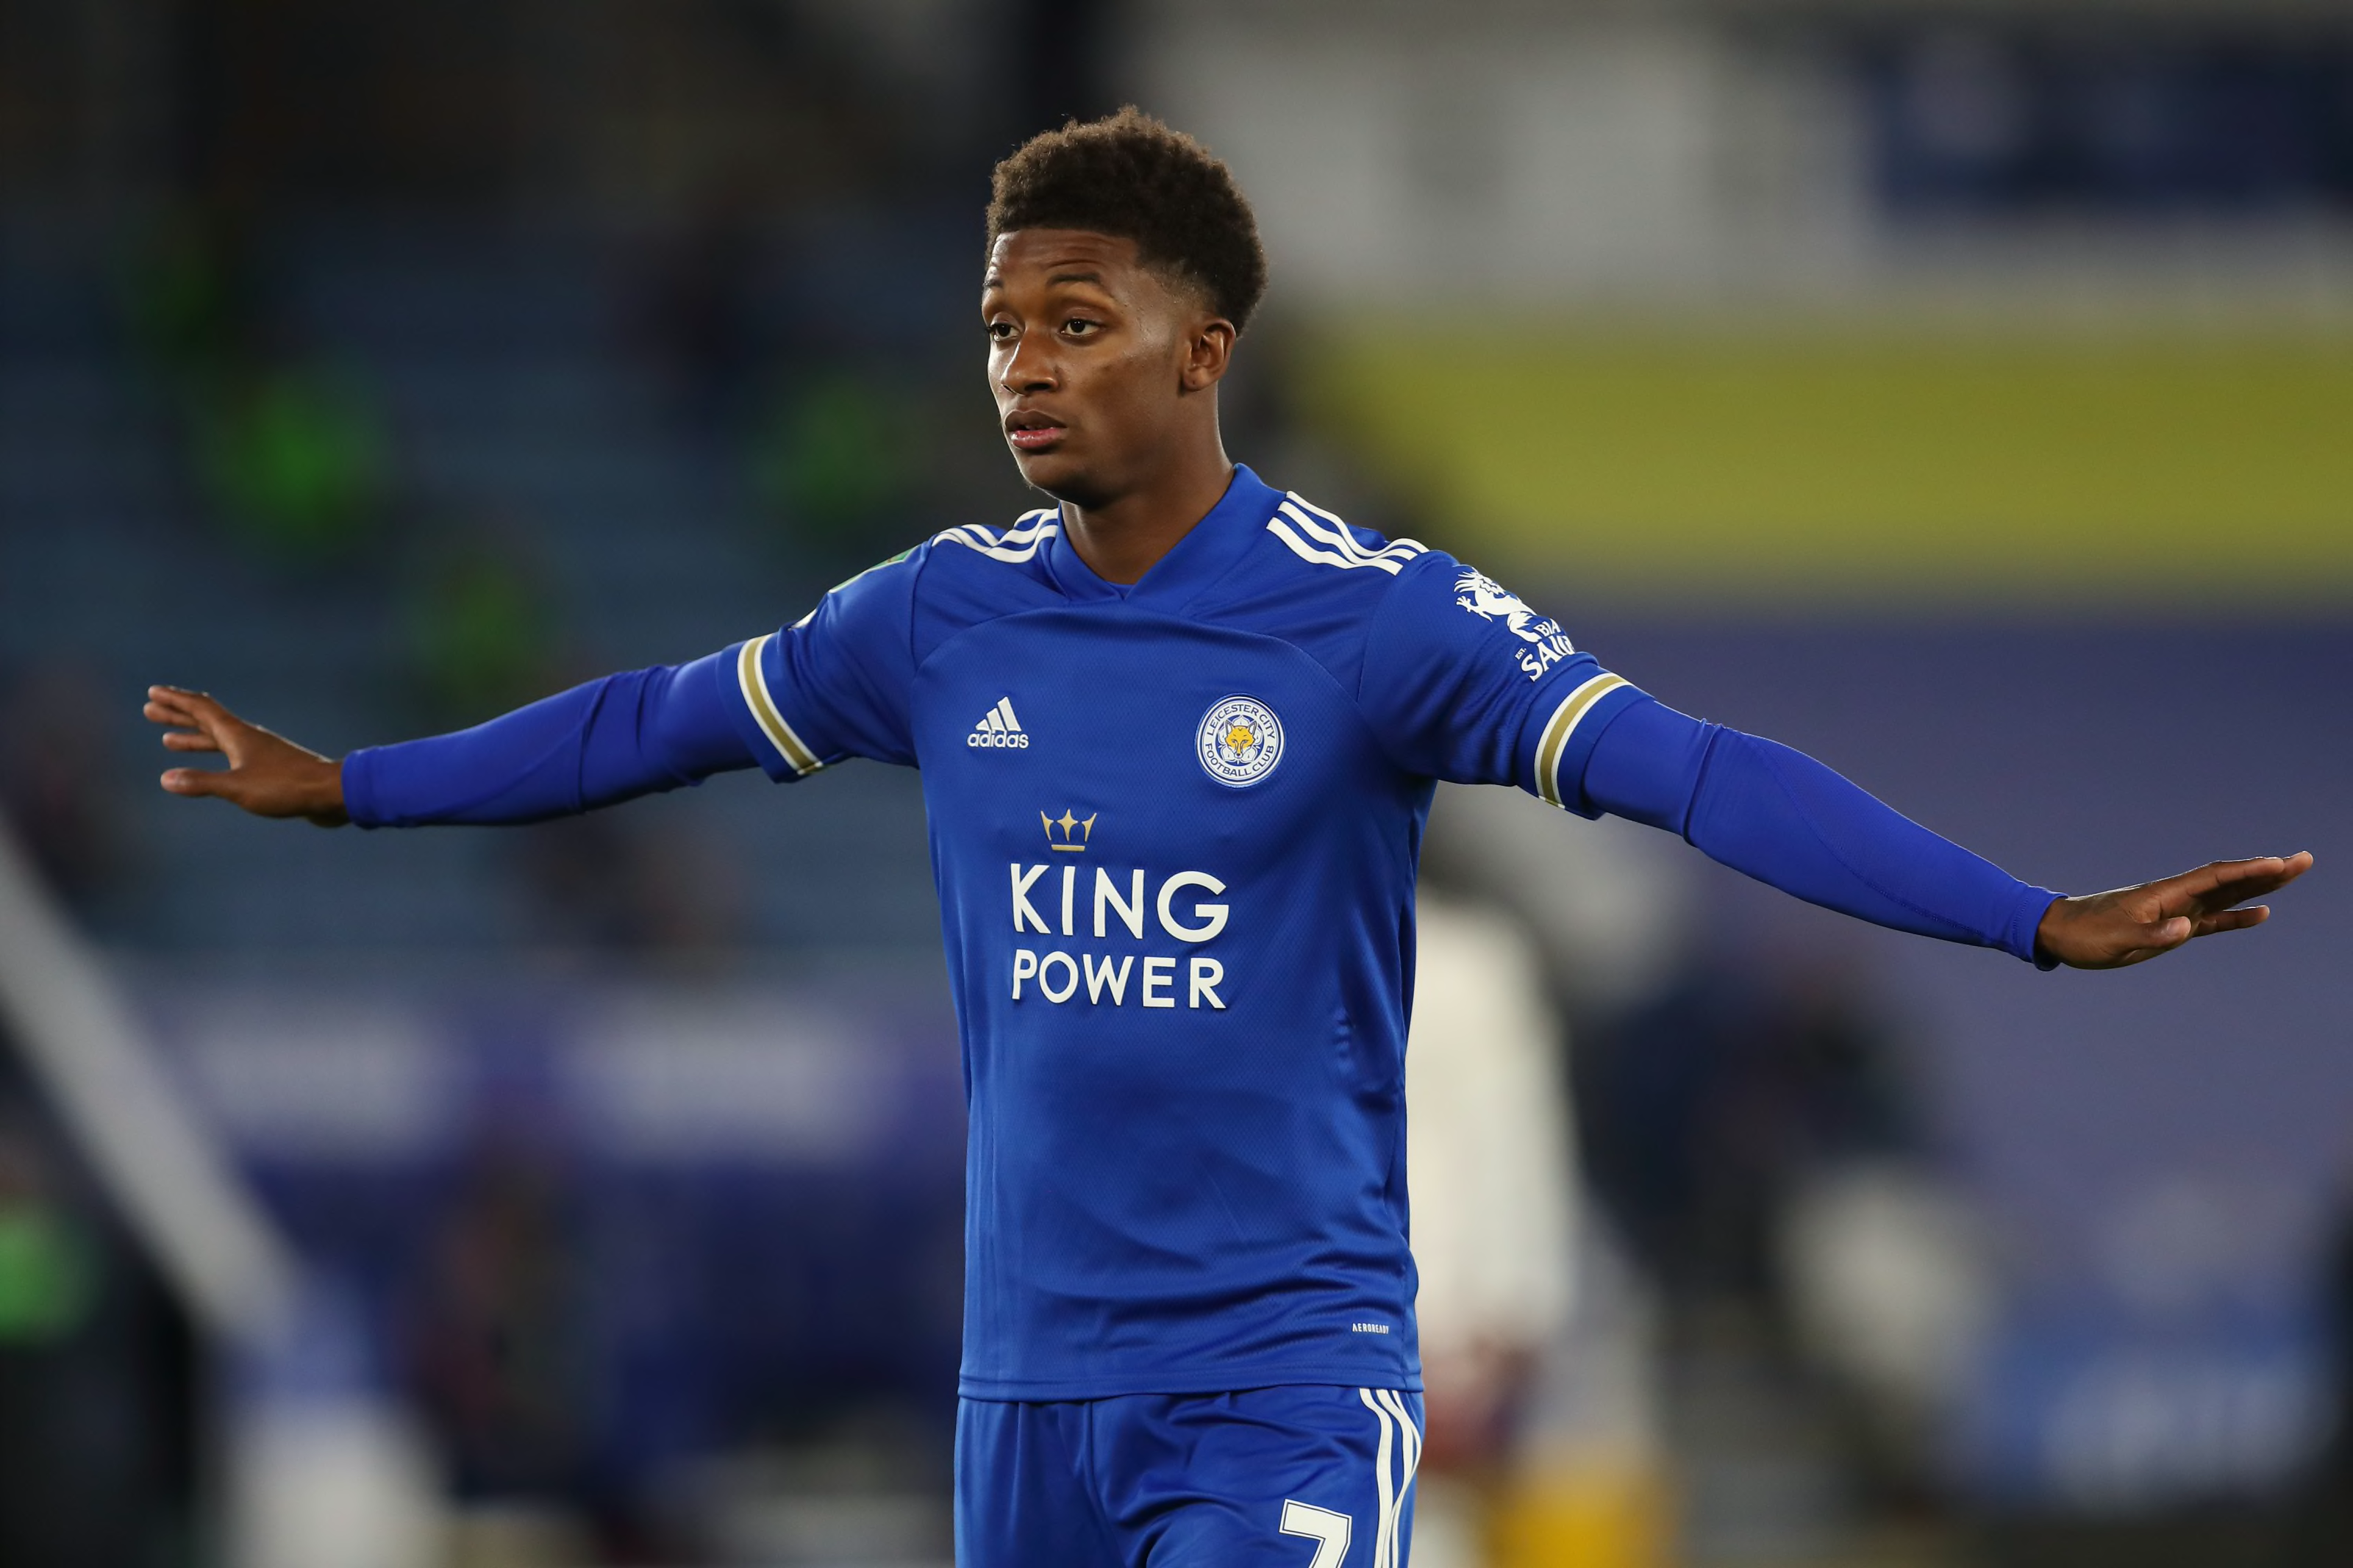 Leicester City winger Demarai Gray is wanted by Premier League rivals